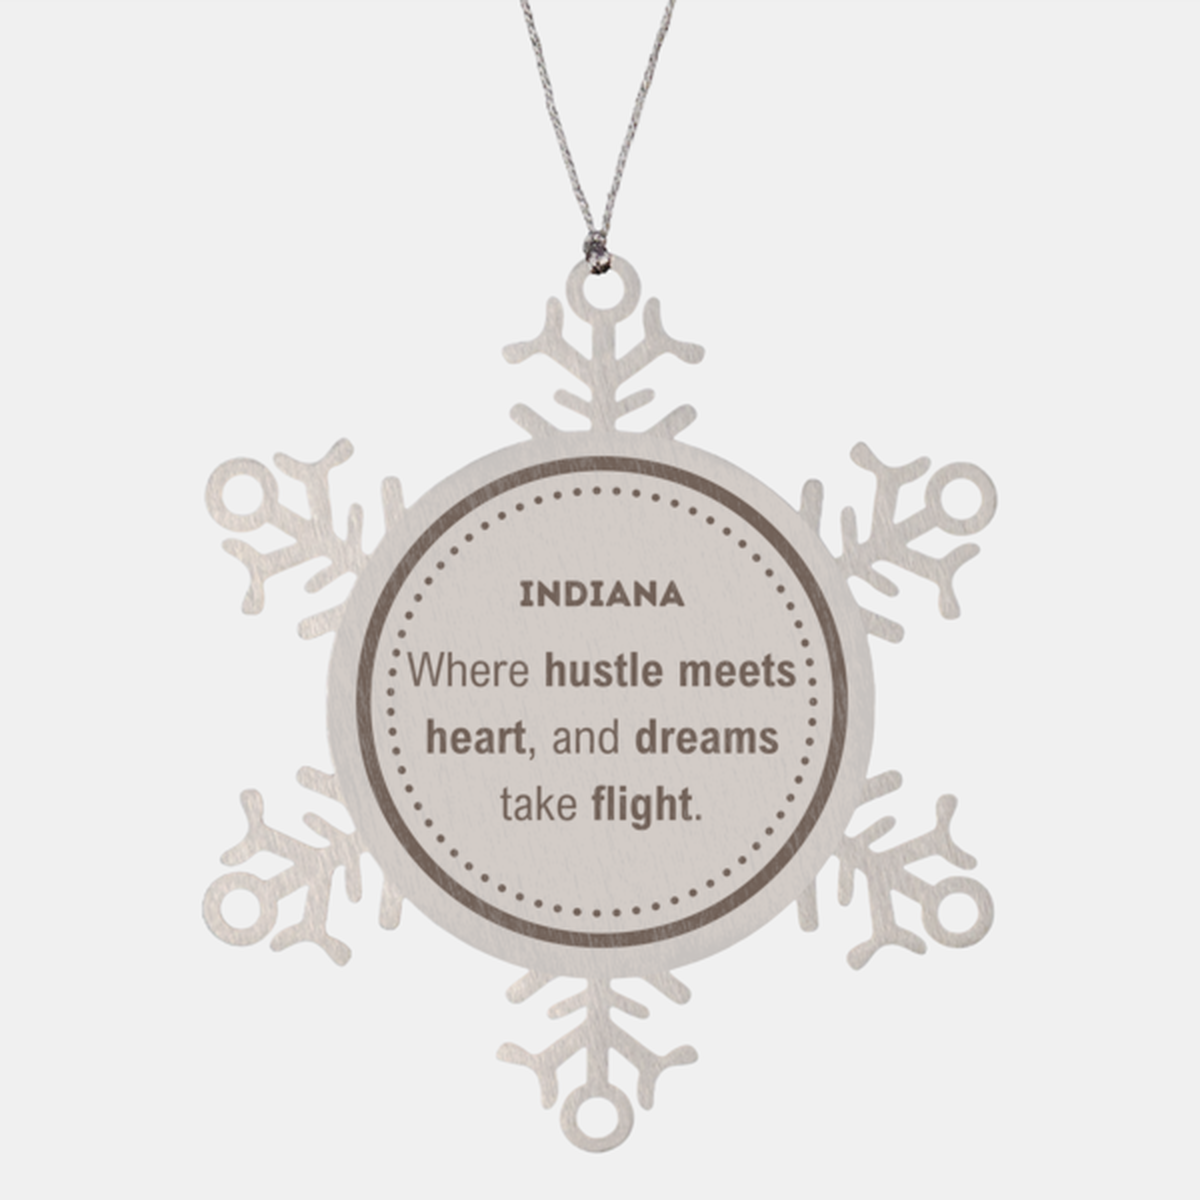 Indiana: Where hustle meets heart, and dreams take flight, Indiana Ornament Gifts, Proud Indiana Christmas Indiana Snowflake Ornament, Indiana State People, Men, Women, Friends